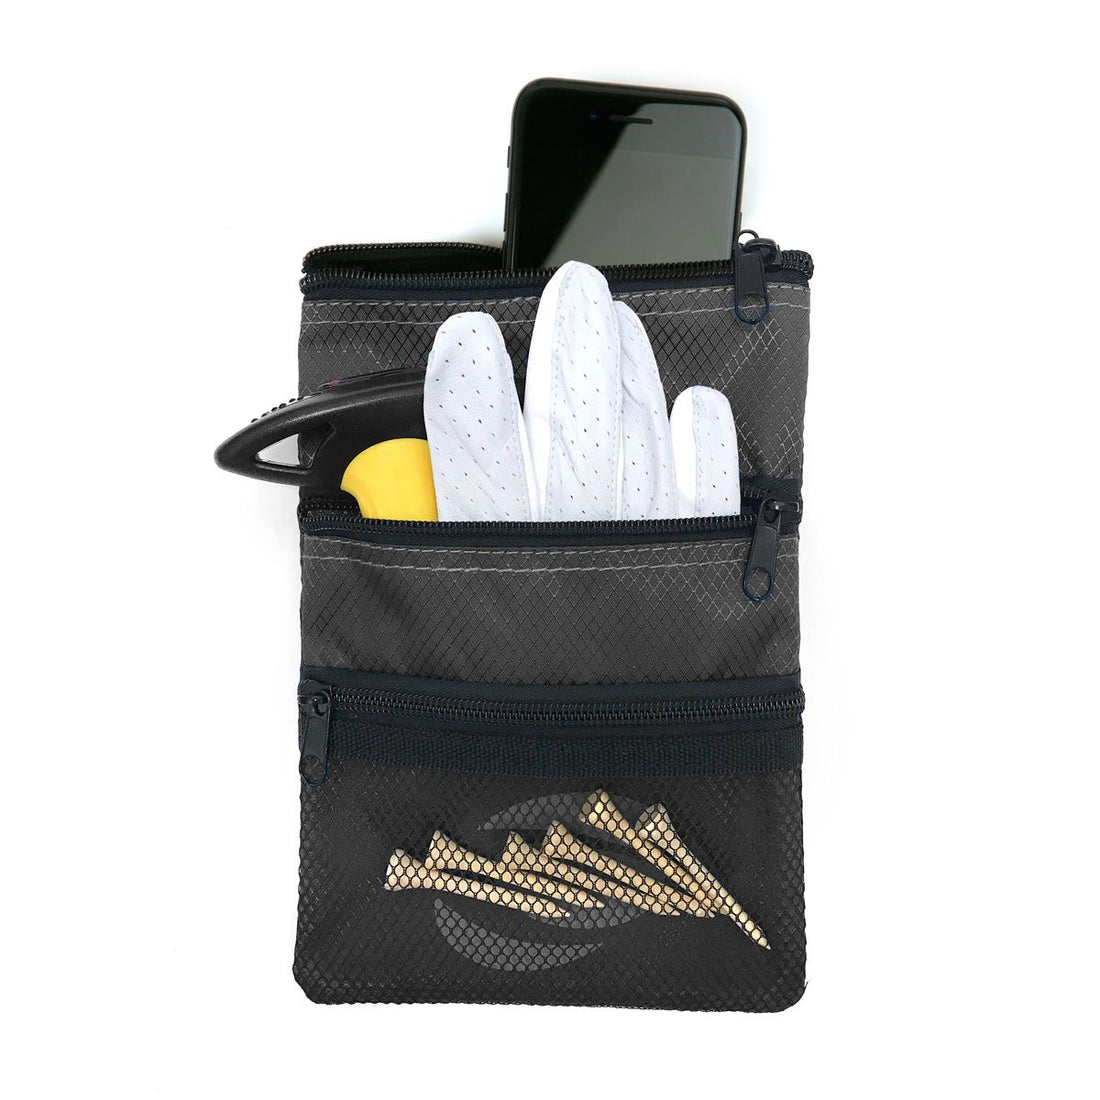 front view of a black Orlimar Golf Detachable Accessory Pouch with cell phone, white glove and 6 natural golf tees inside the mesh pocket